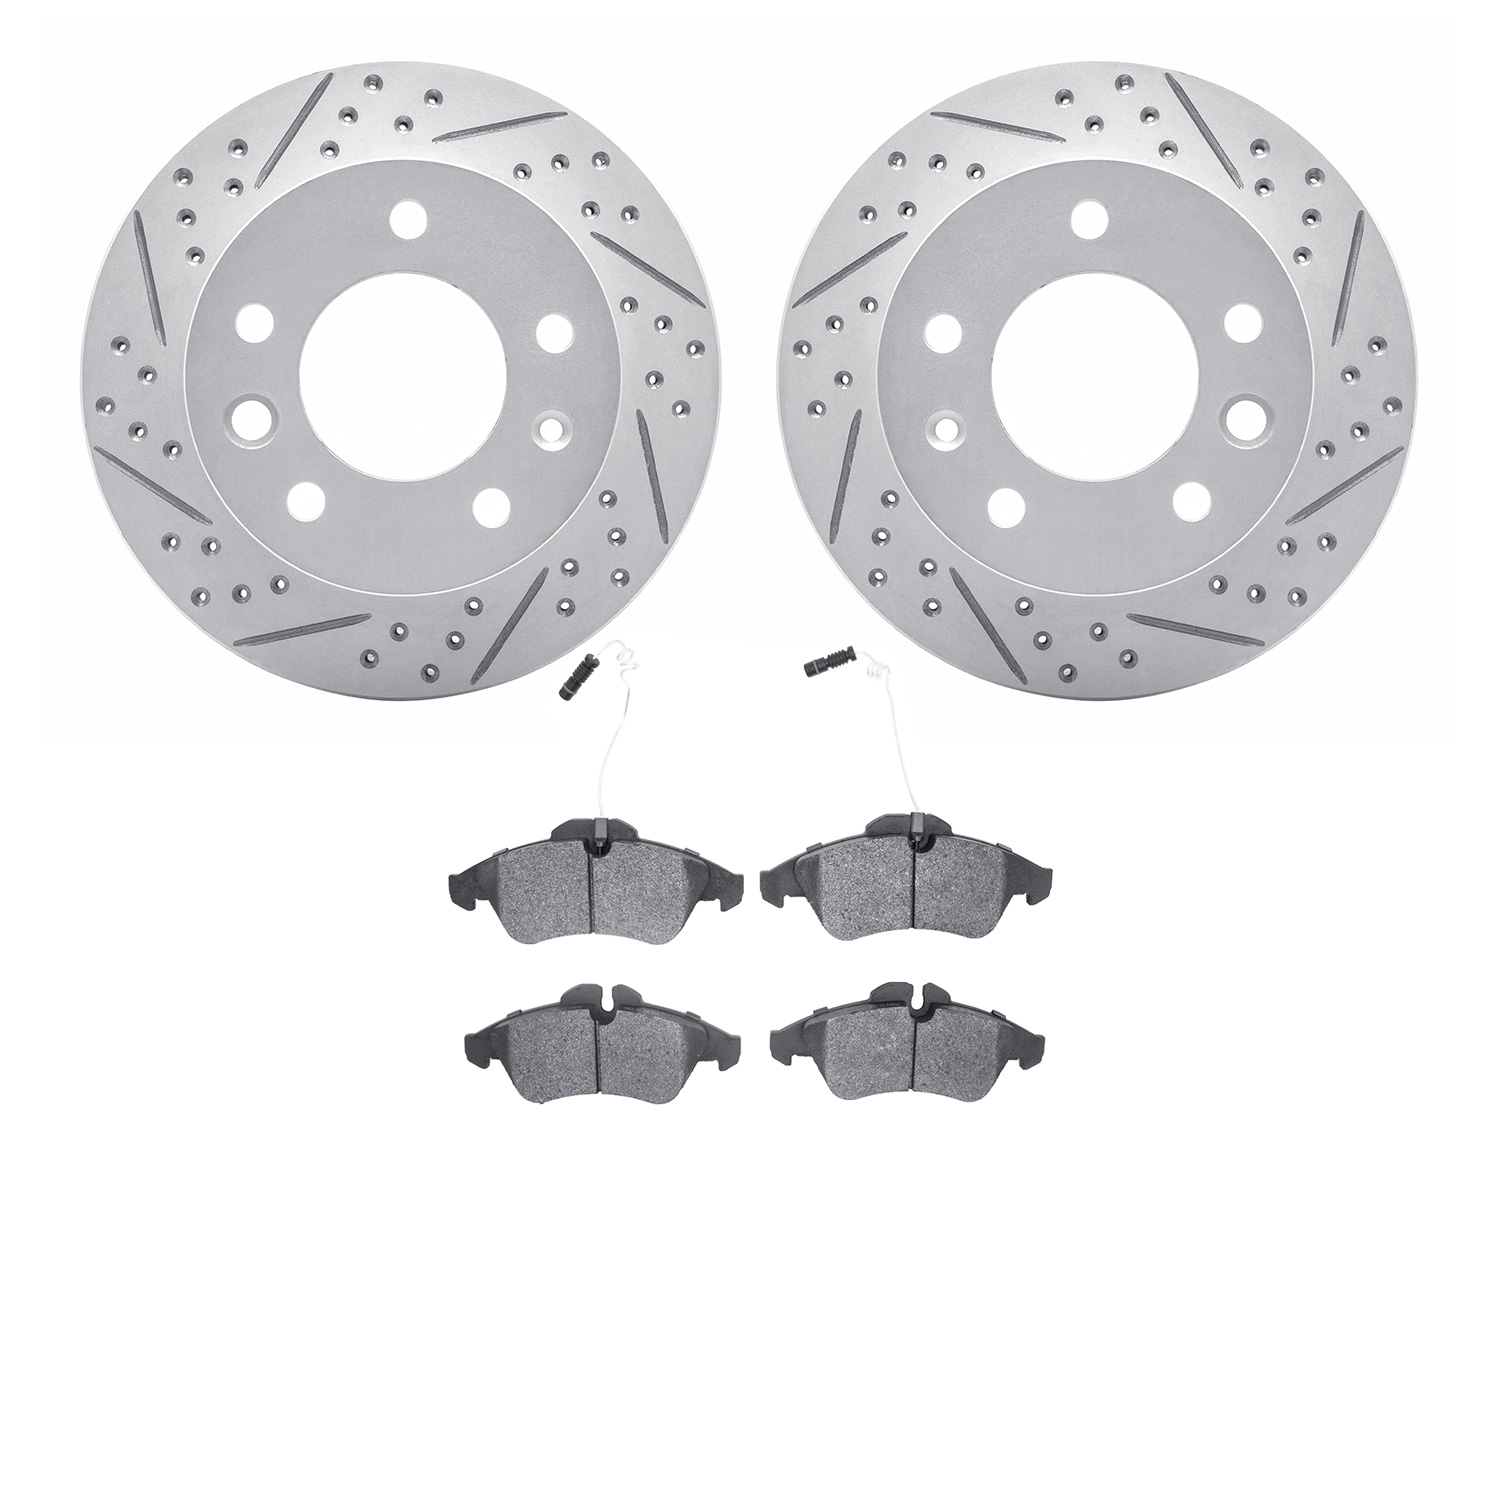 2202-40001 Geoperformance Drilled/Slotted Rotors w/Heavy-Duty Pads Kit, 2002-2006 Multiple Makes/Models, Position: Front